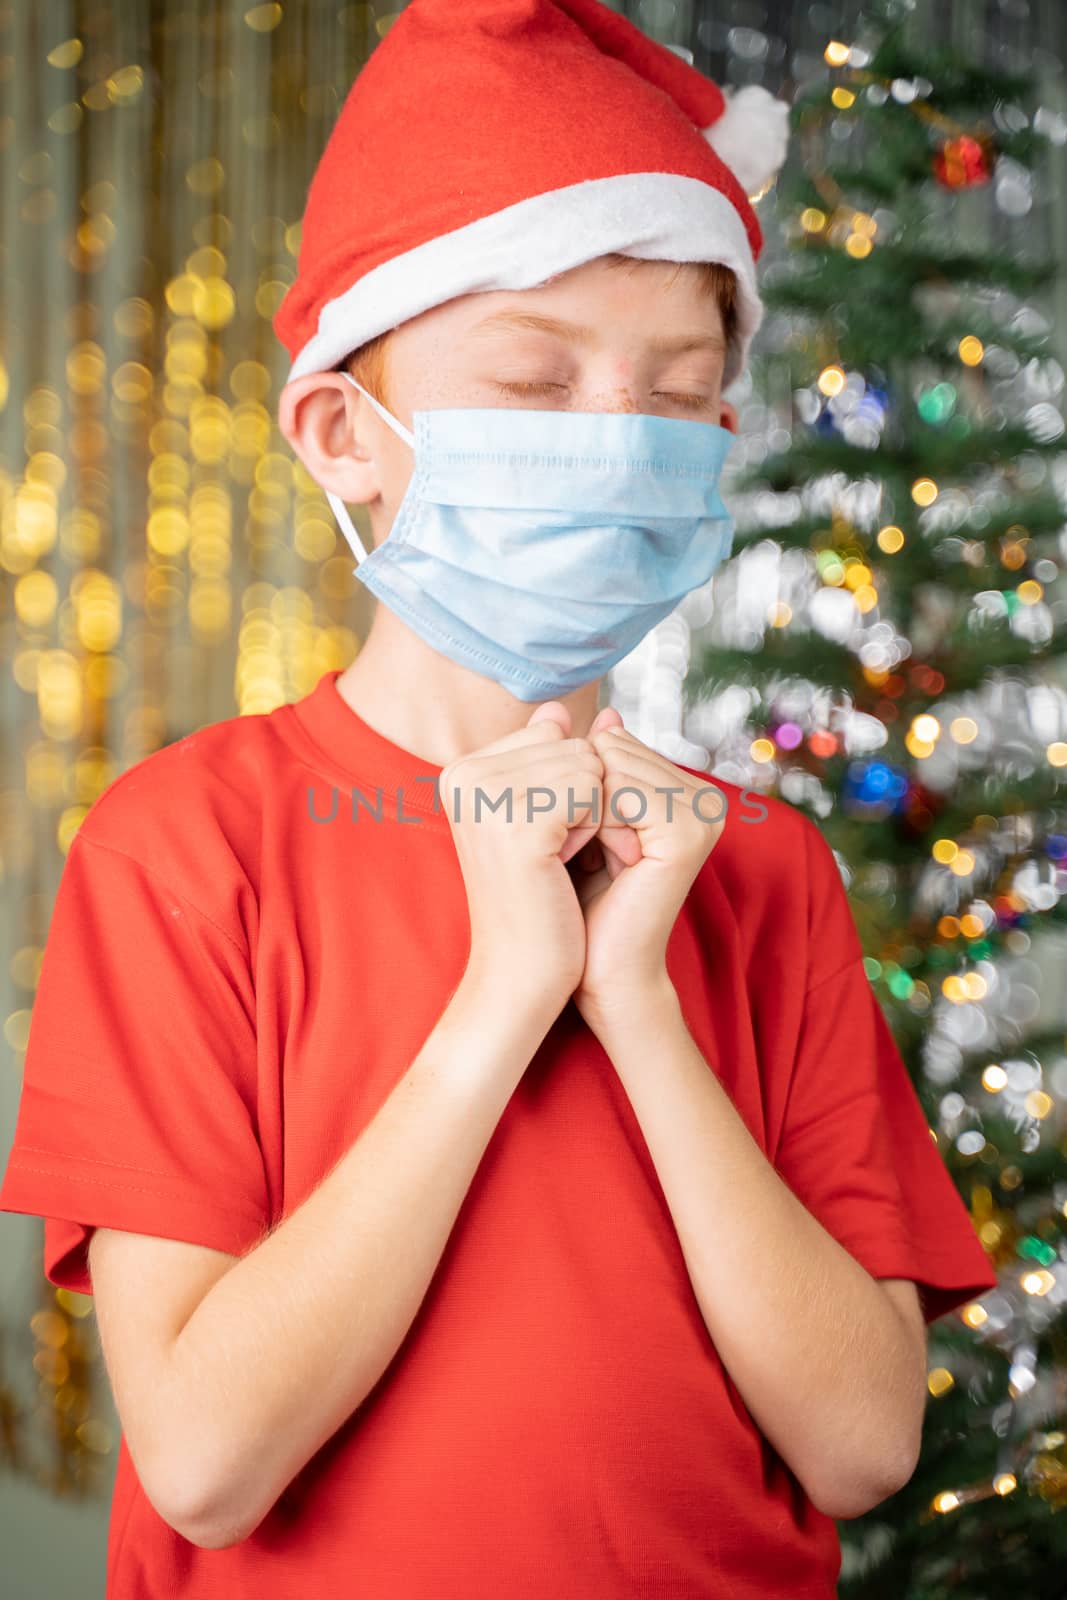 Kid in medical mask and Santa hat praying for santa on Christmas decorated background for gifts. by lakshmiprasad.maski@gmai.com